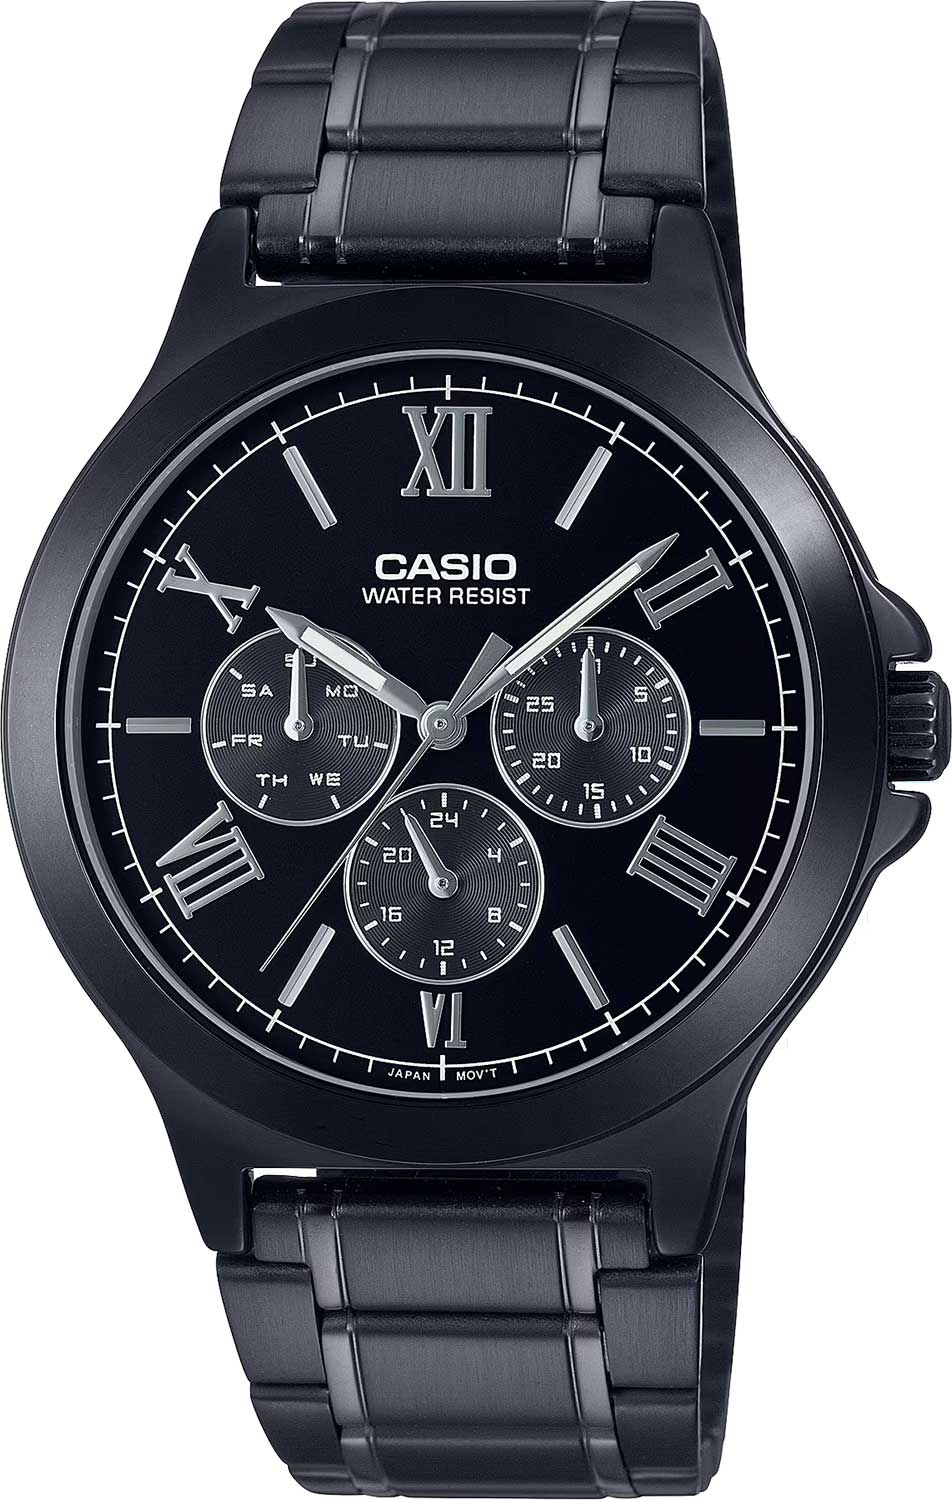    Casio Collection MTP-V300B-1A